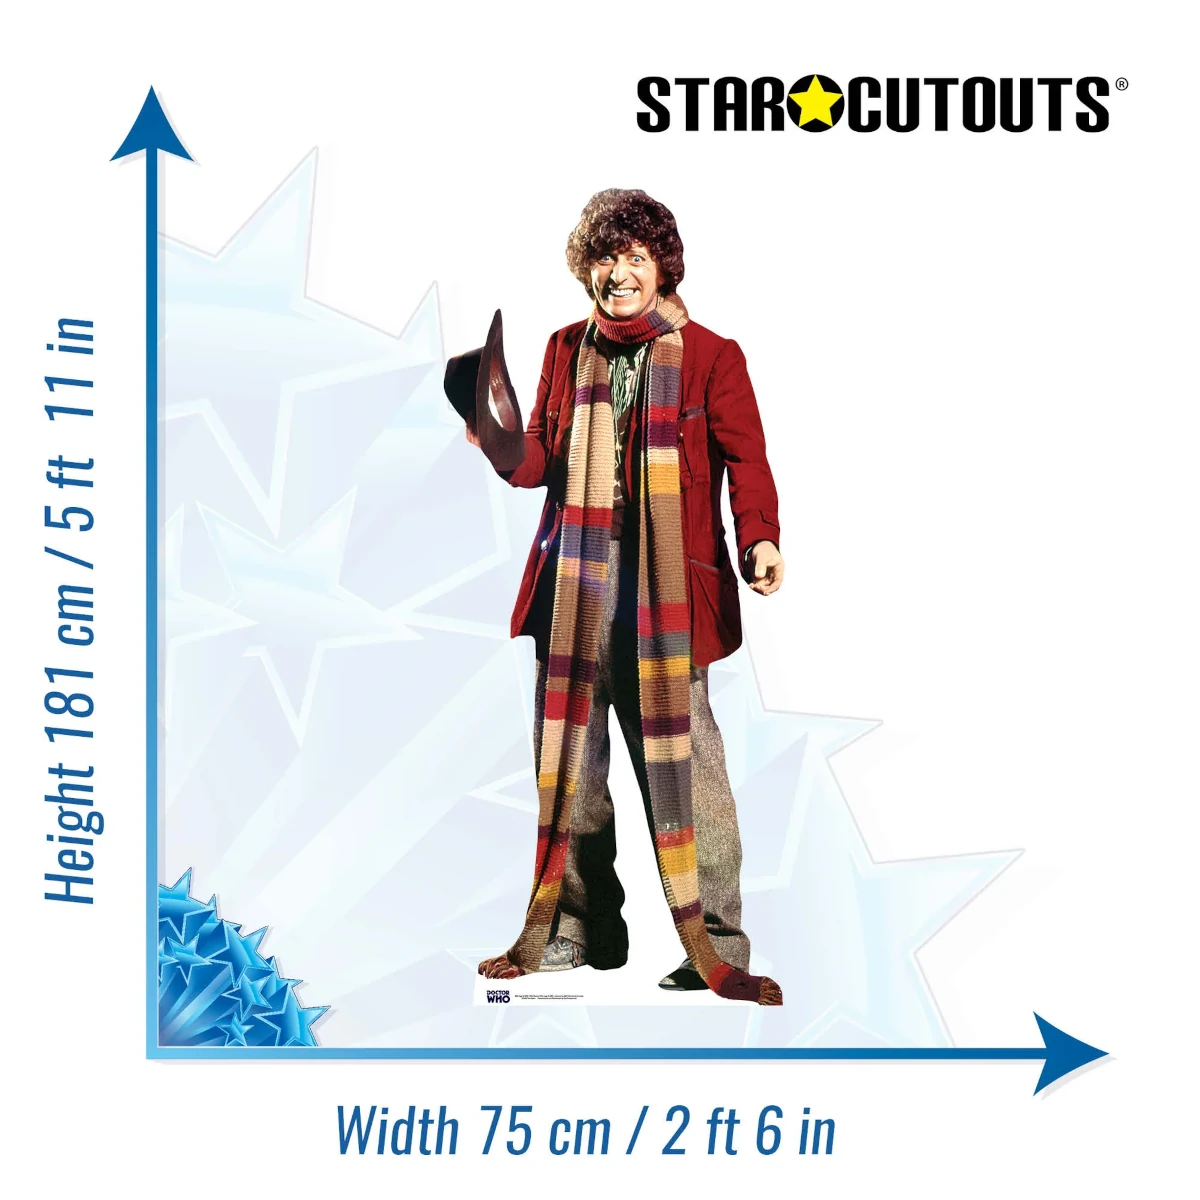 SC406 The Fourth Doctor 'Tom Baker' (Doctor Who) Official Lifesize Cardboard Cutout Standee Size